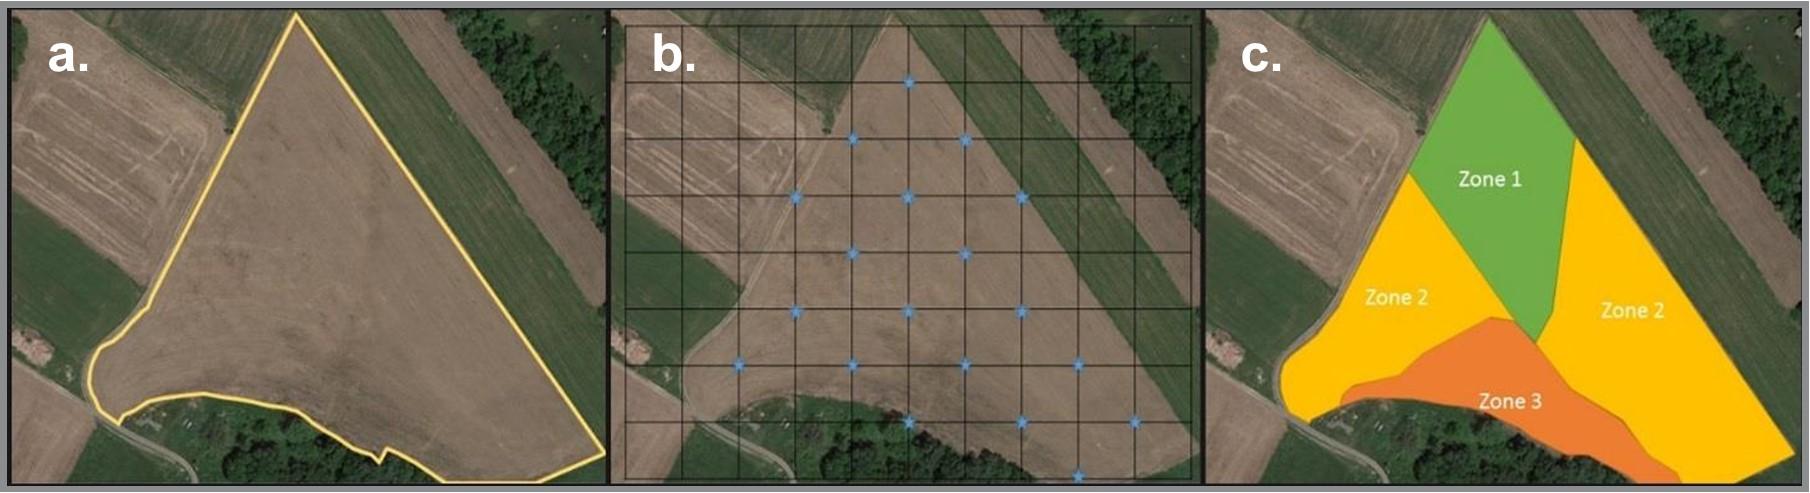 Figure 1. Soil samples may be collected for the (a) whole field, (b) on a consistently spaced grid or (c) by management zones. 